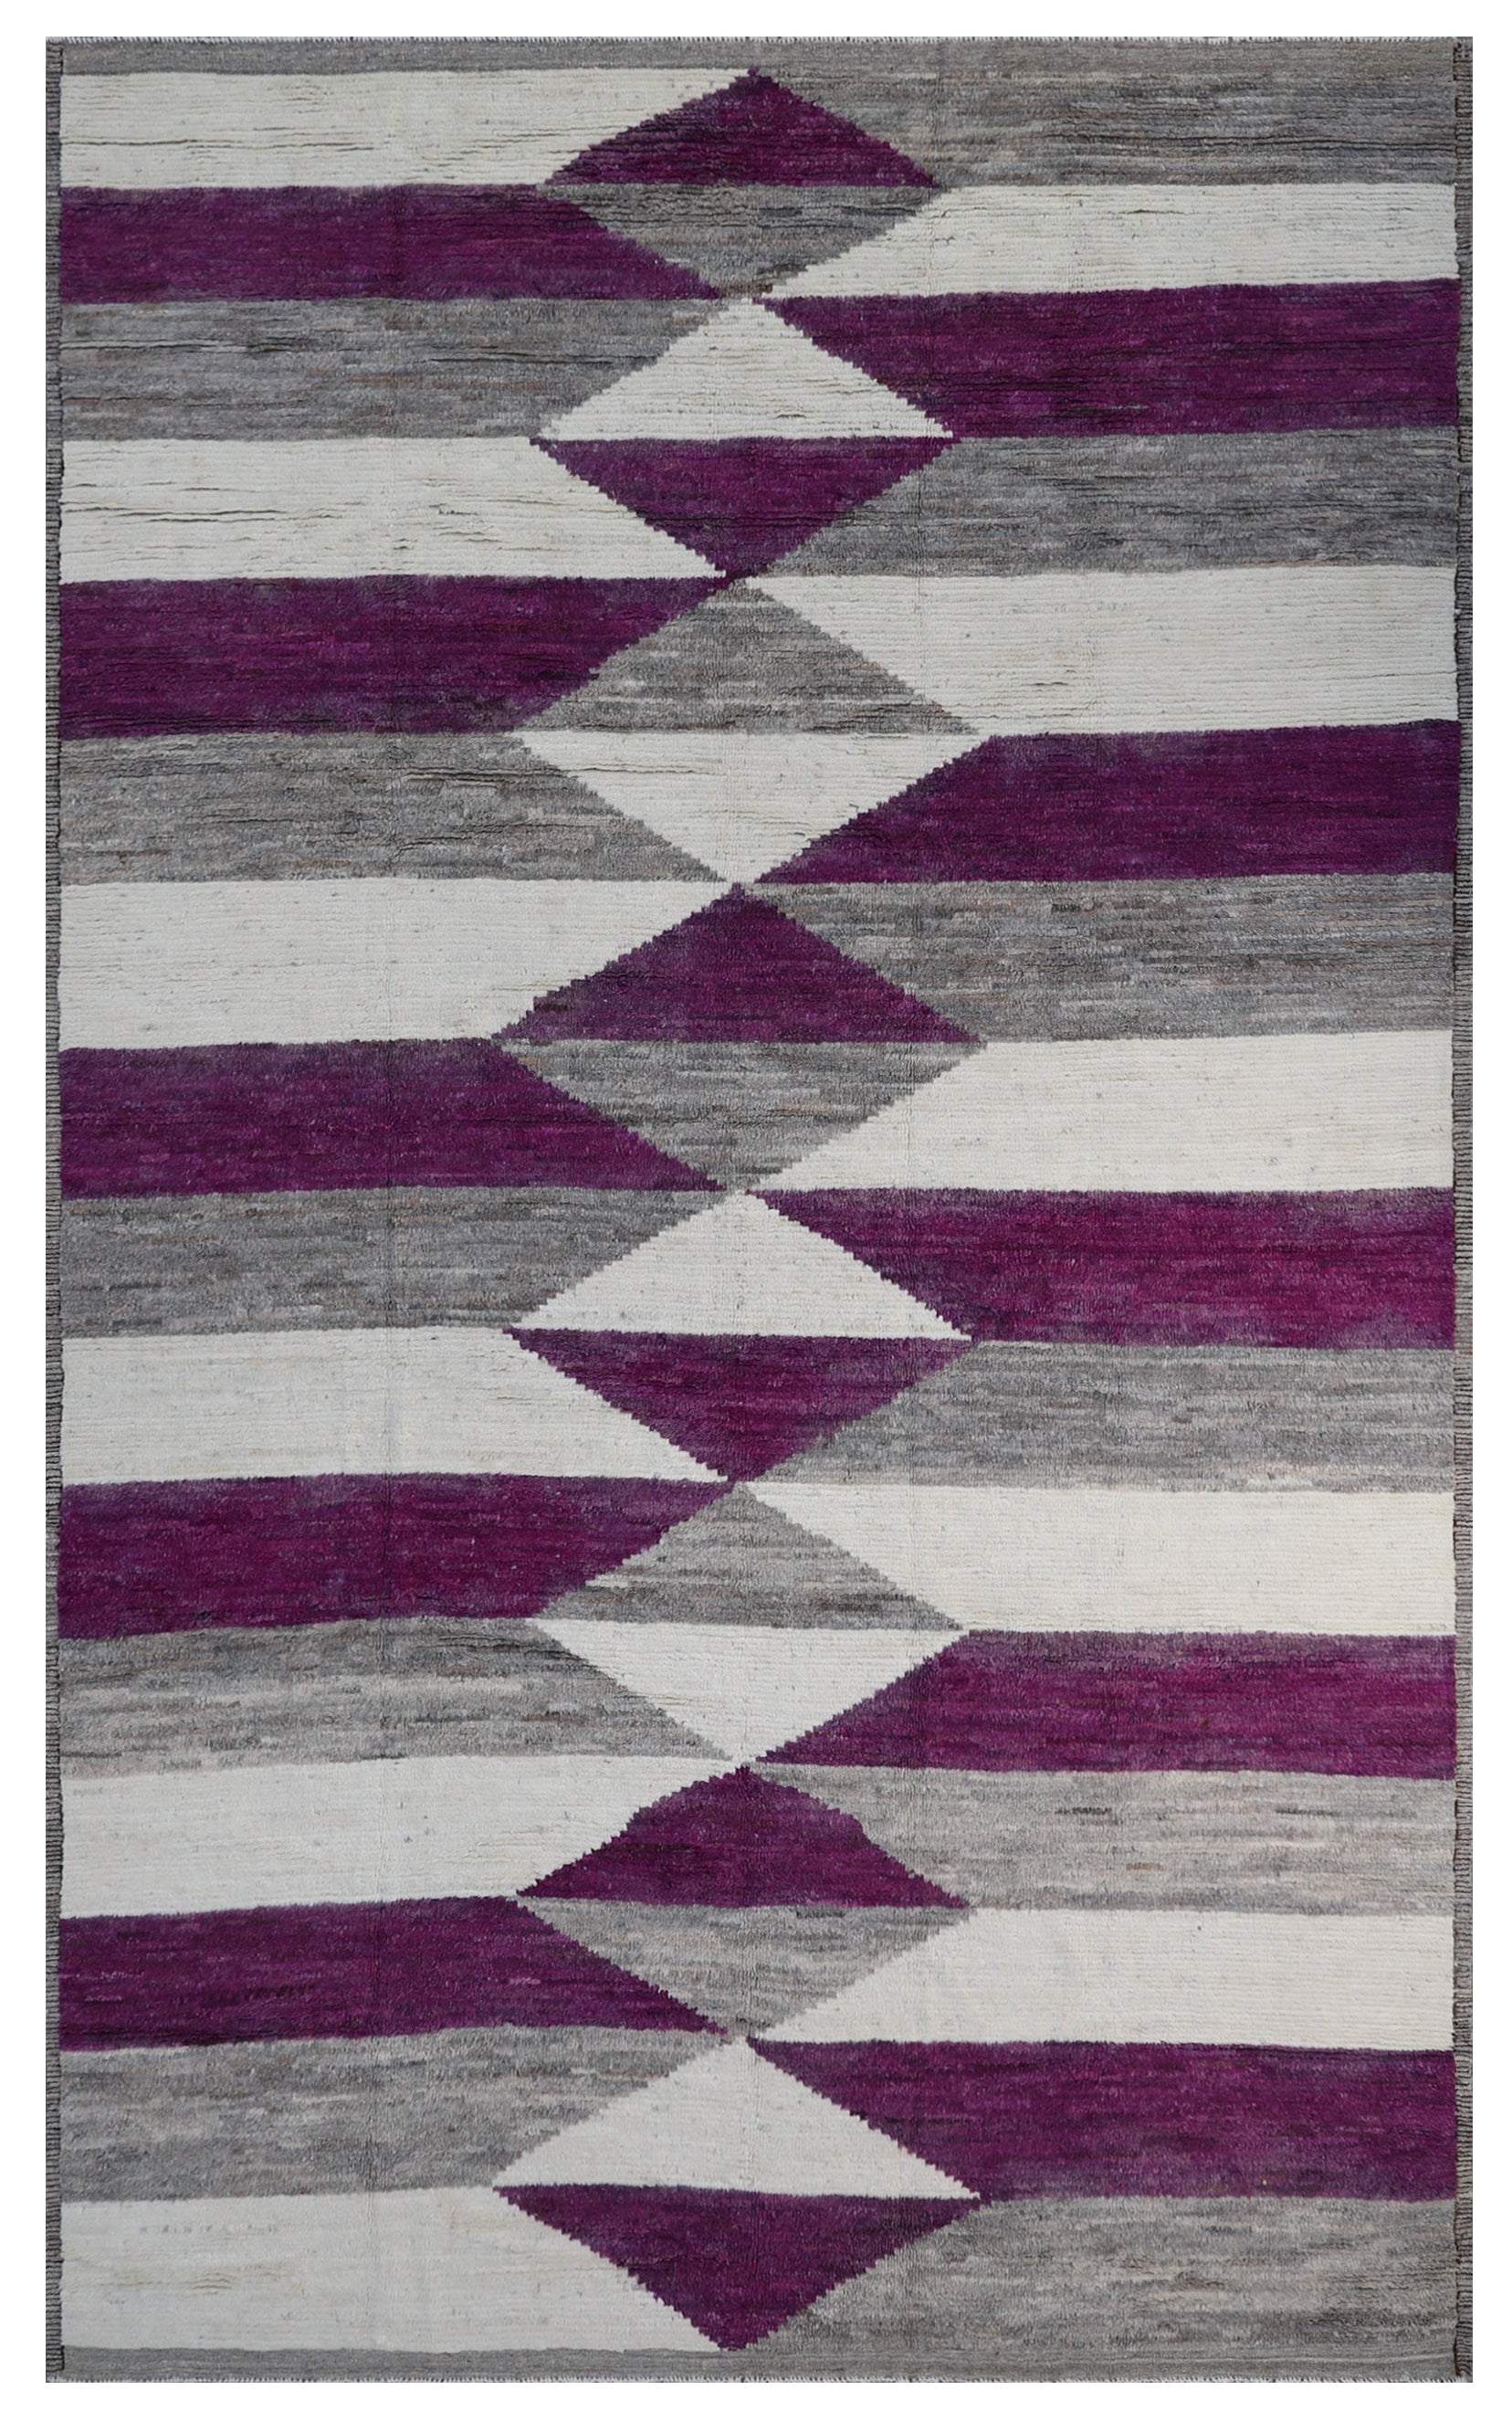 This is a 9'x14' purple gray and white geometric area rug.